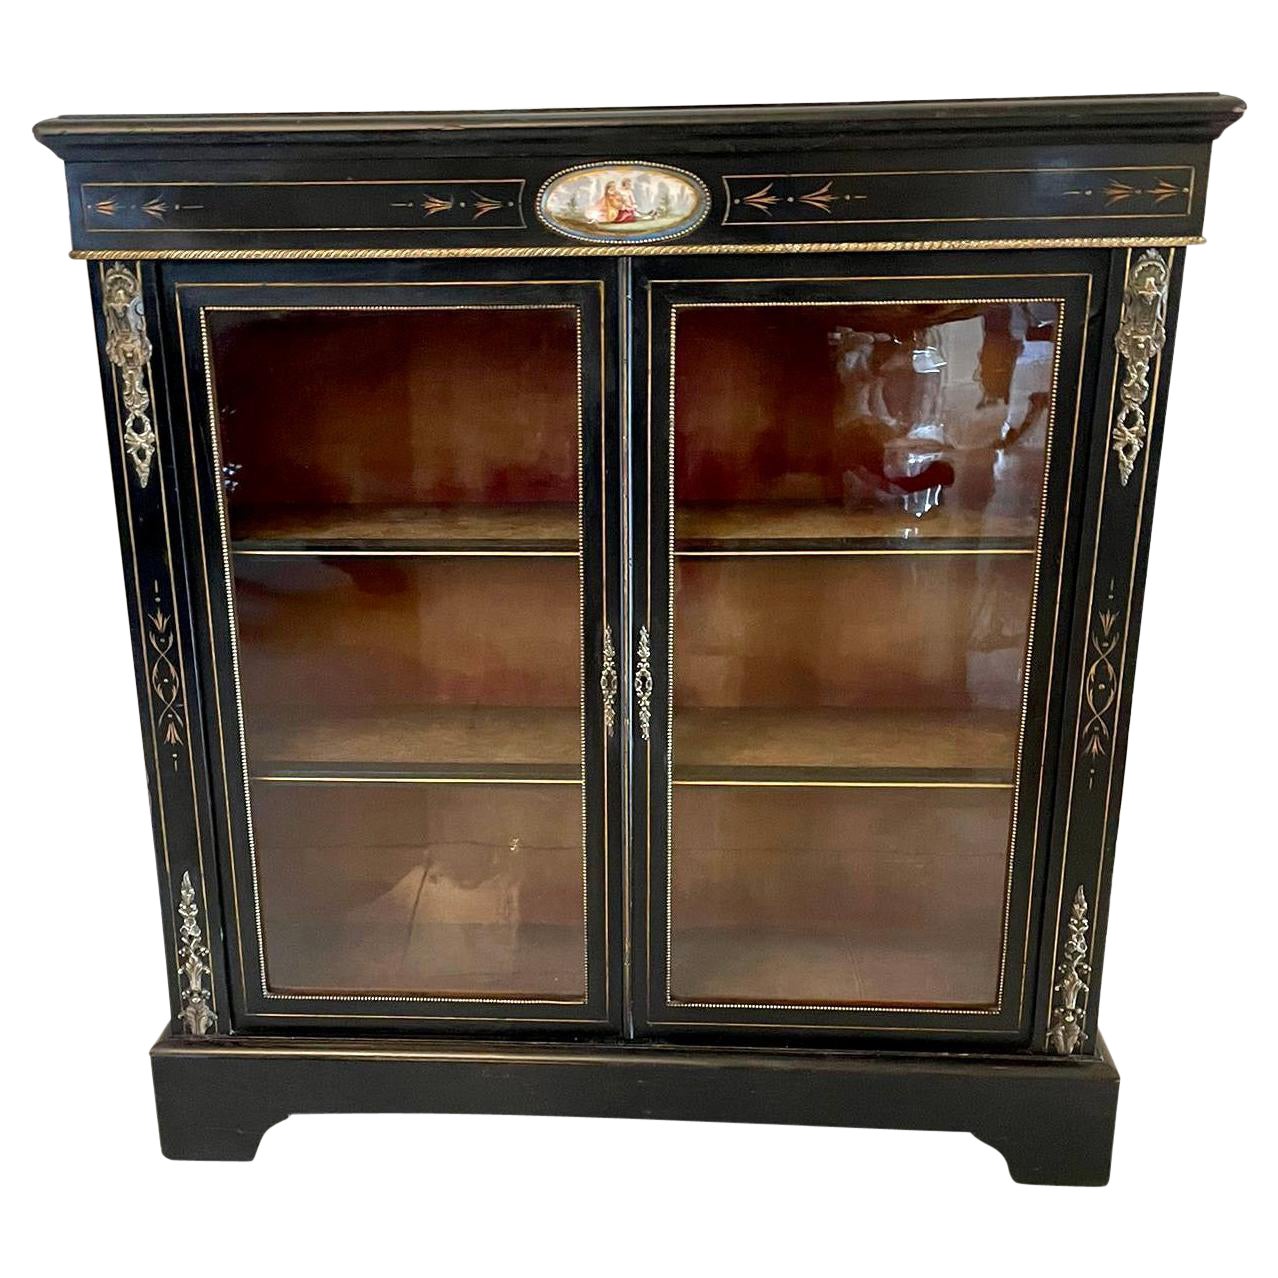  Antique Victorian French Ornate Ormolu Mounts Ebonised Display Cabinet For Sale